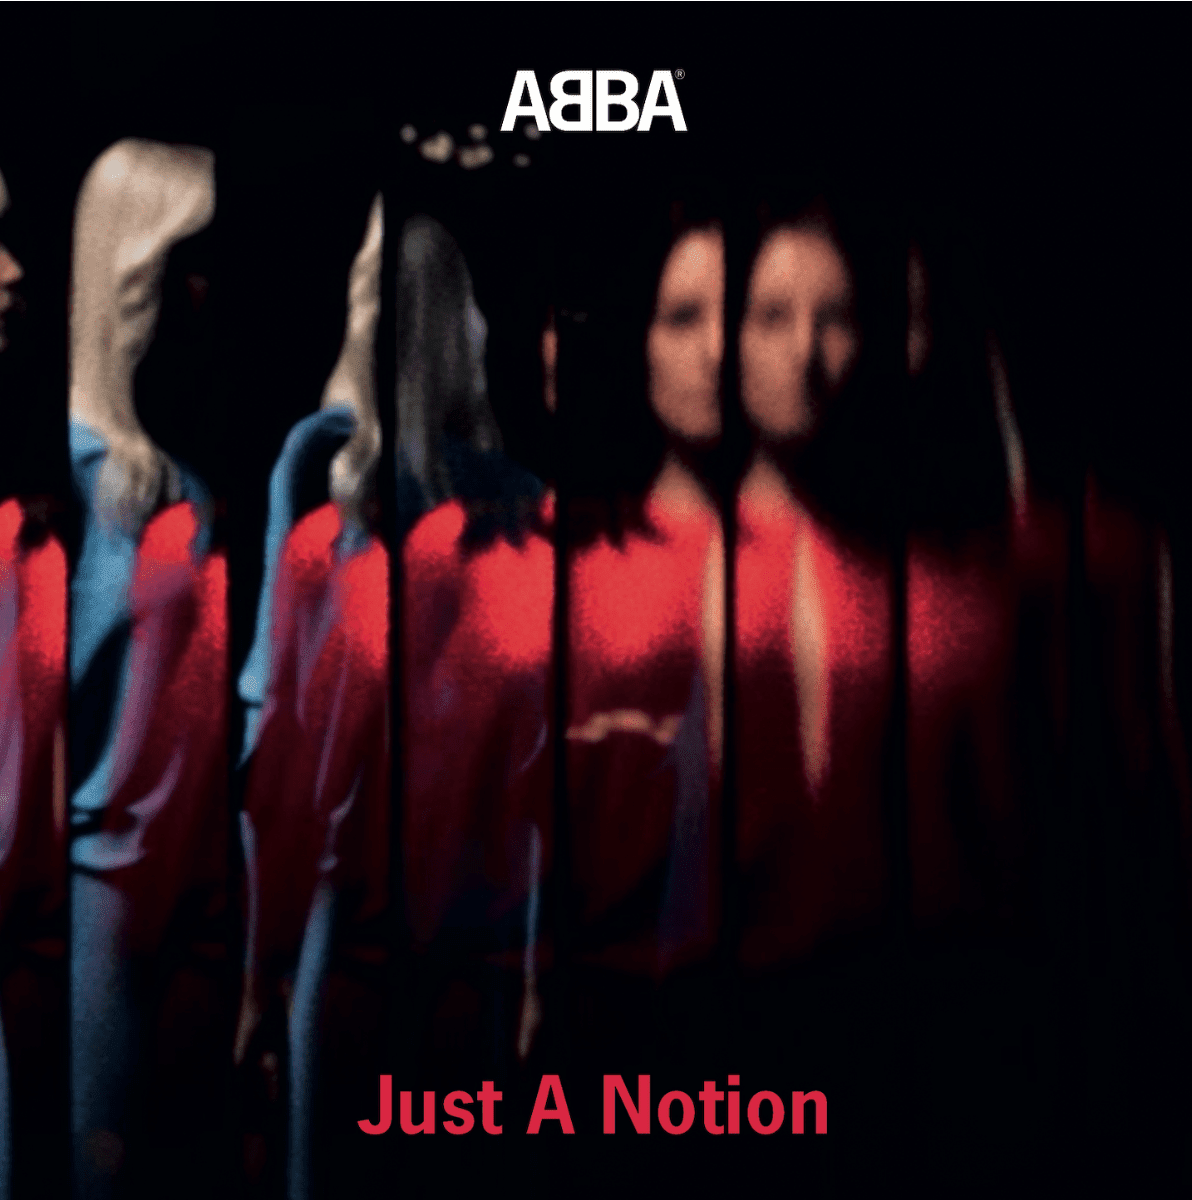 ABBA – “Just A Notion”